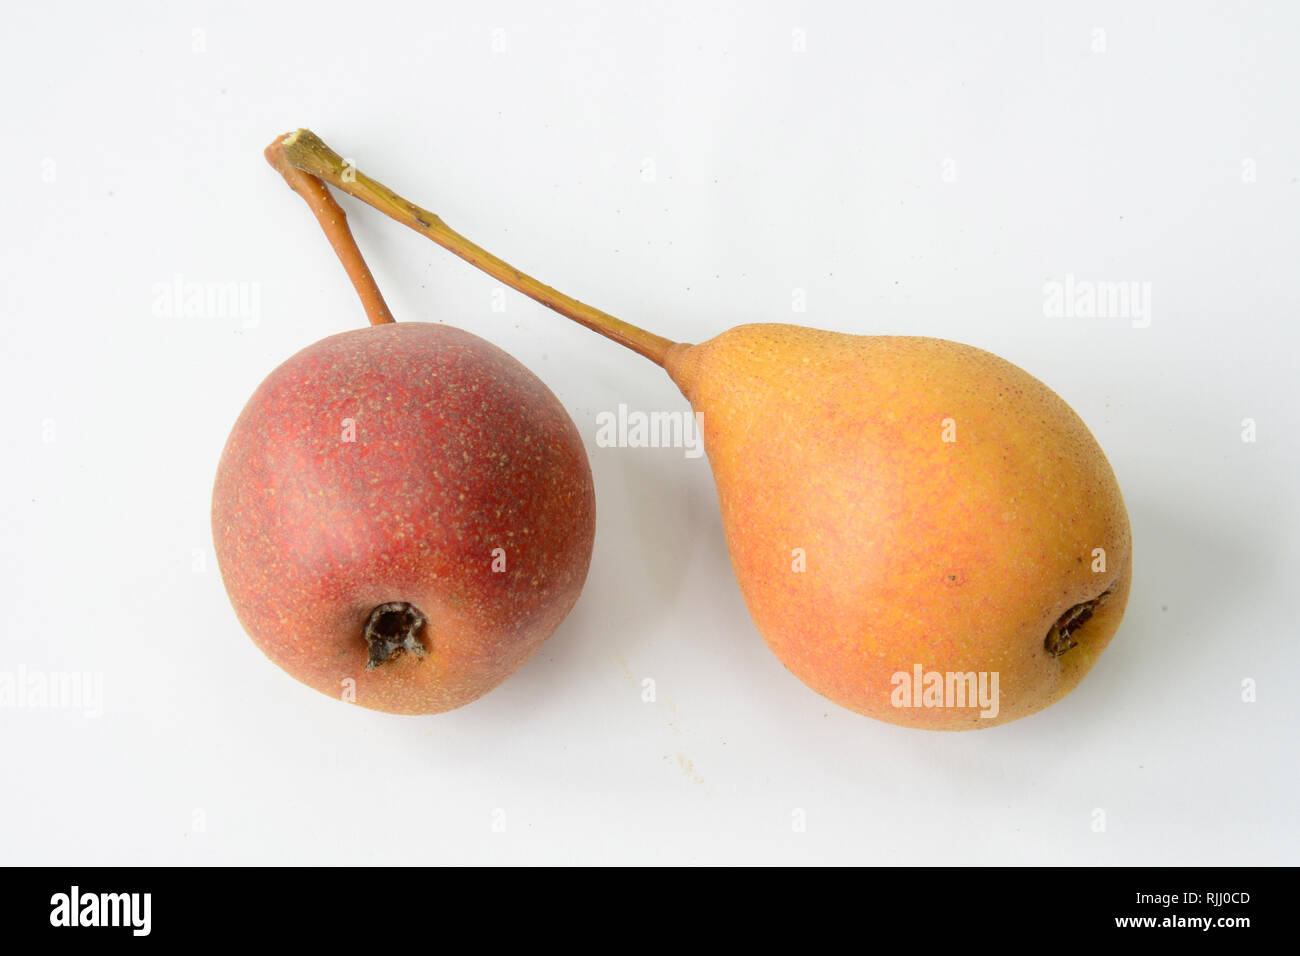 European Wild Pear (Pyrus pyraster).  Two ripe fruit. Studio picture against a white background. Germany Stock Photo